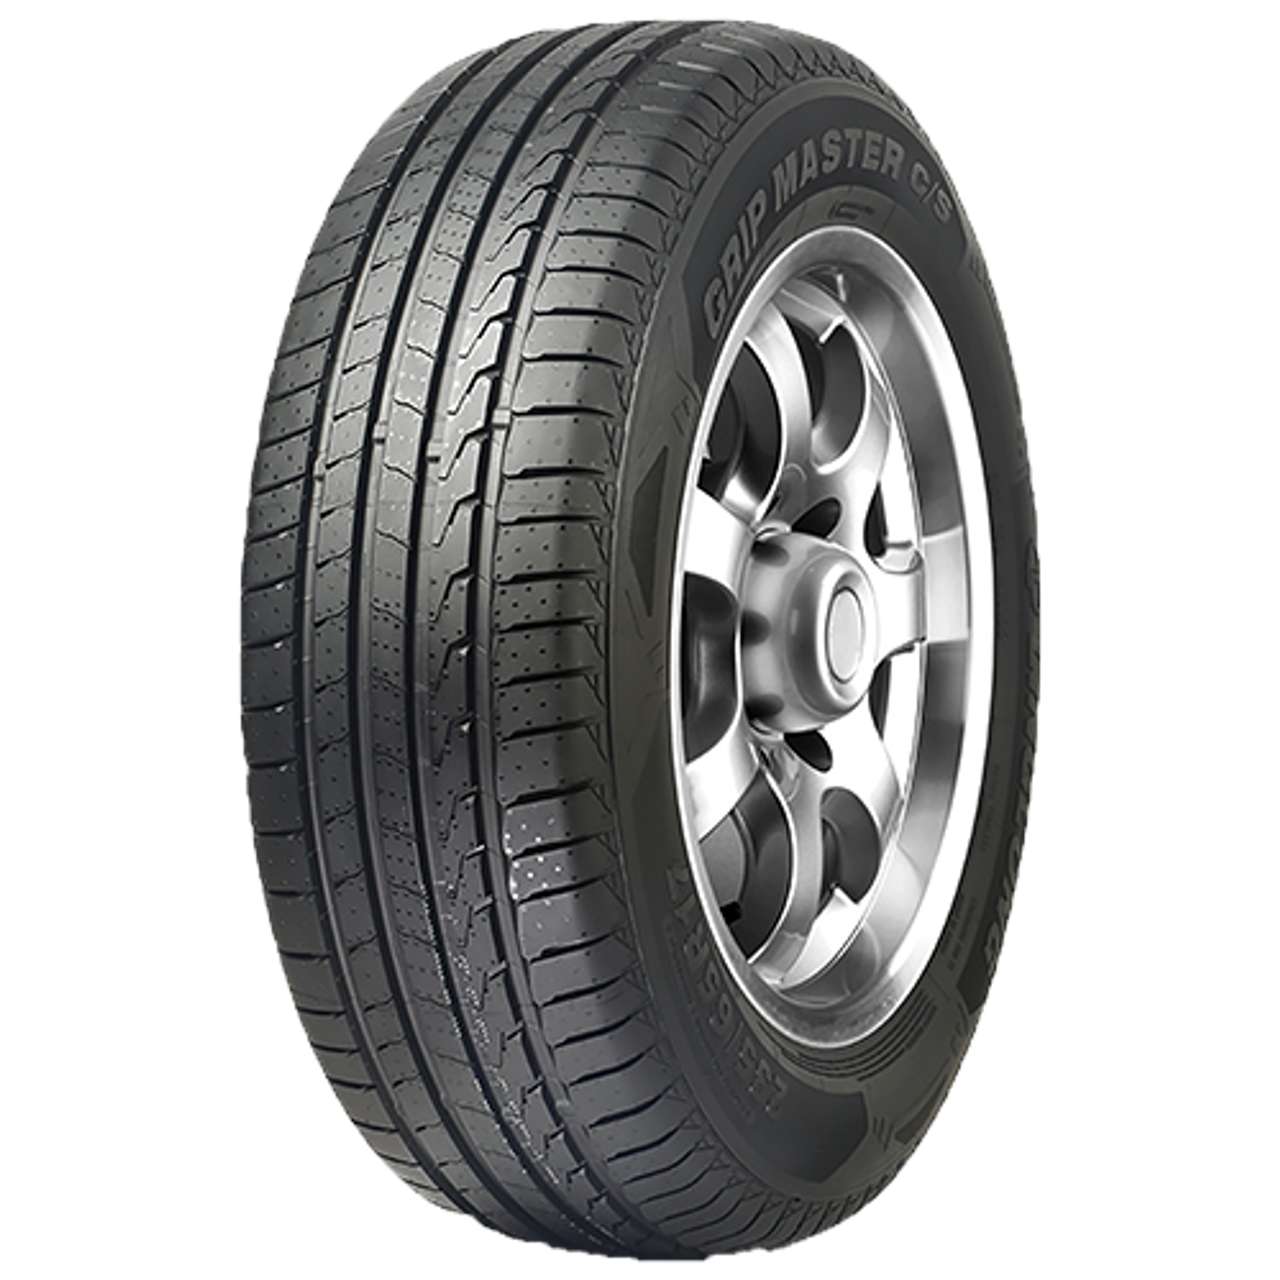 LINGLONG GRIP MASTER C/S 255/55R18 109Y BSW XL